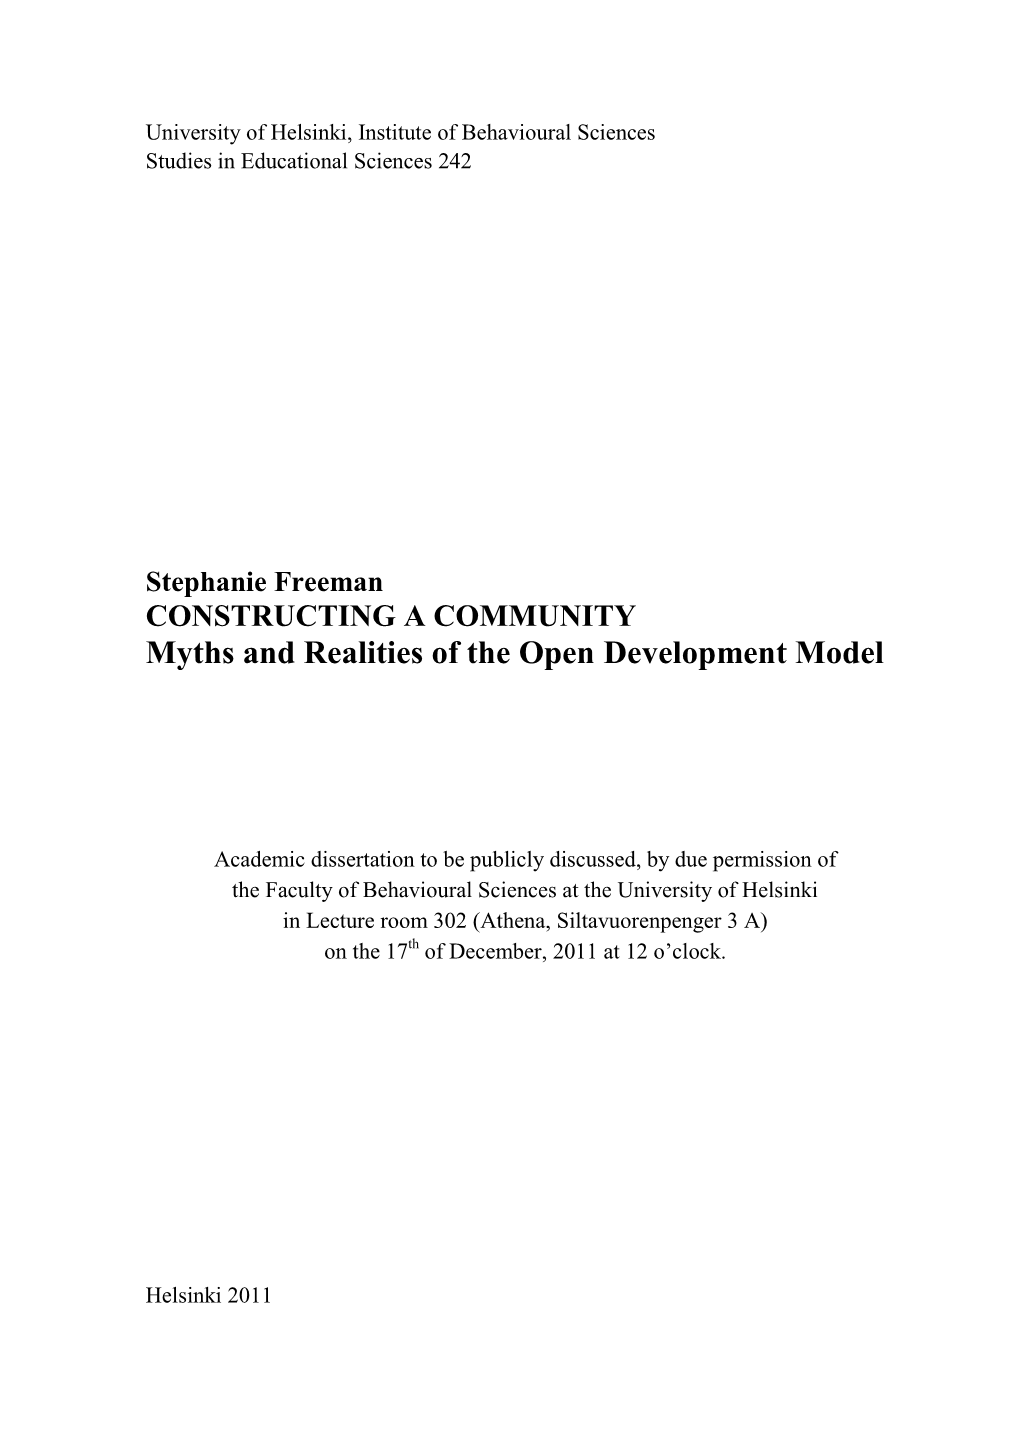 Constructing a Community. Myths and Realities of the Open Development